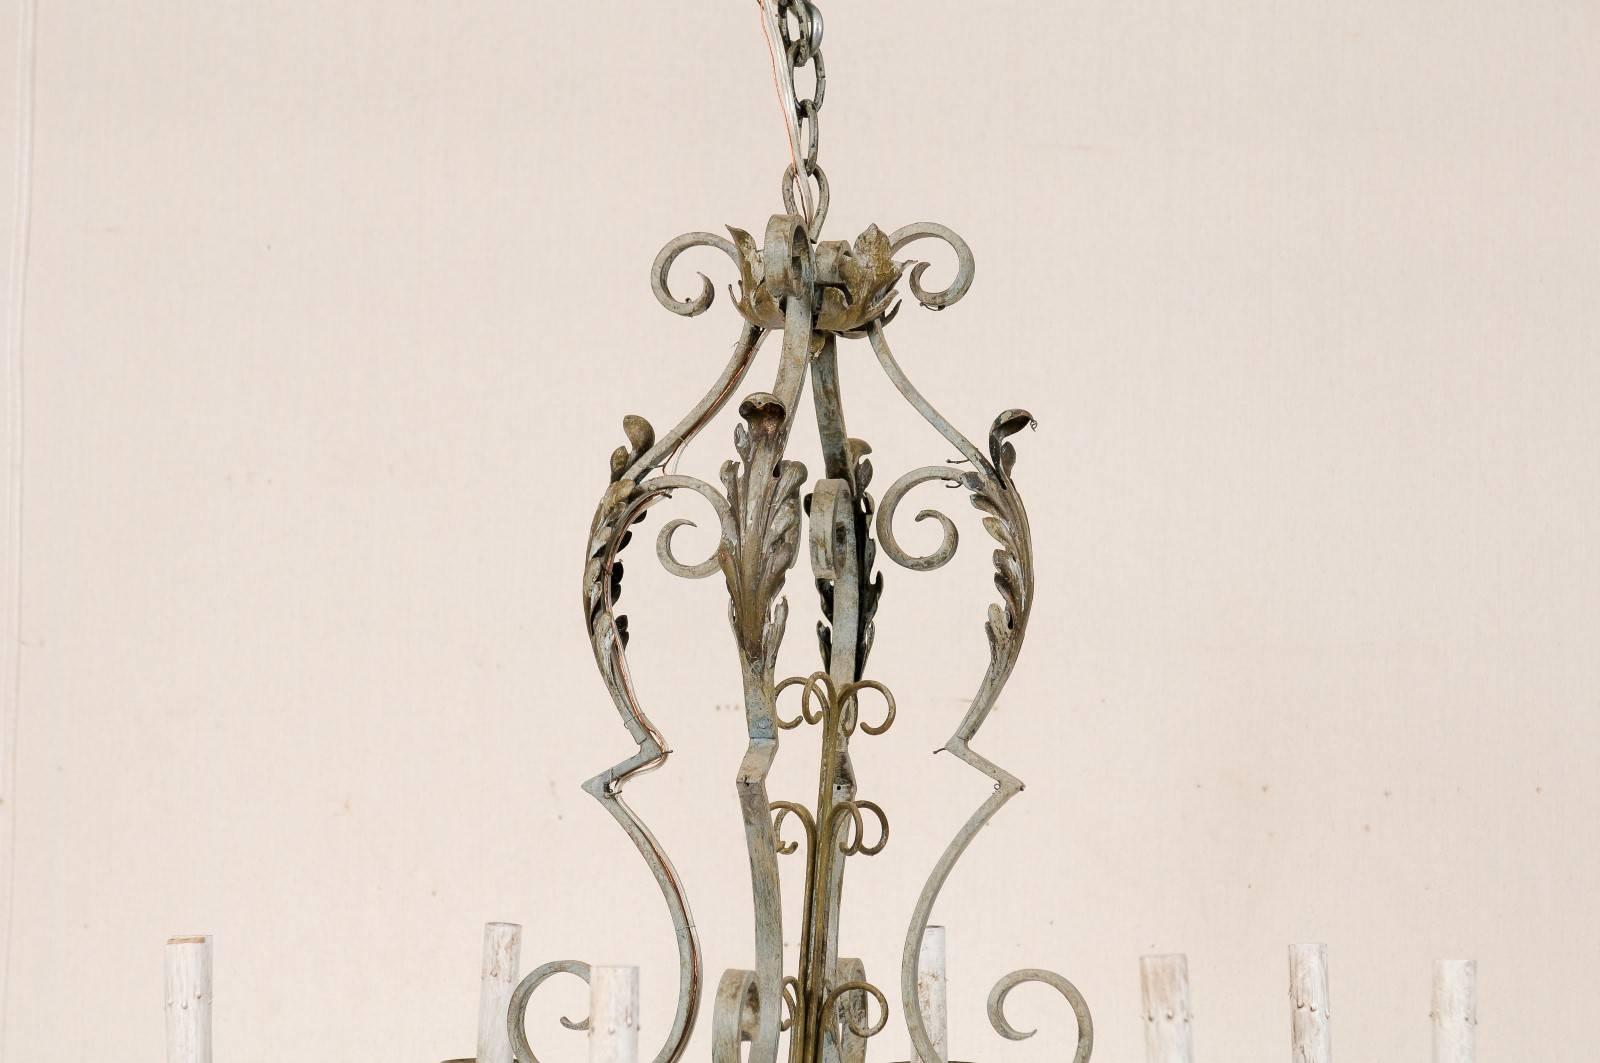 20th Century Ornate French Painted Iron Eight-Light Chandelier with Acanthus Leaves